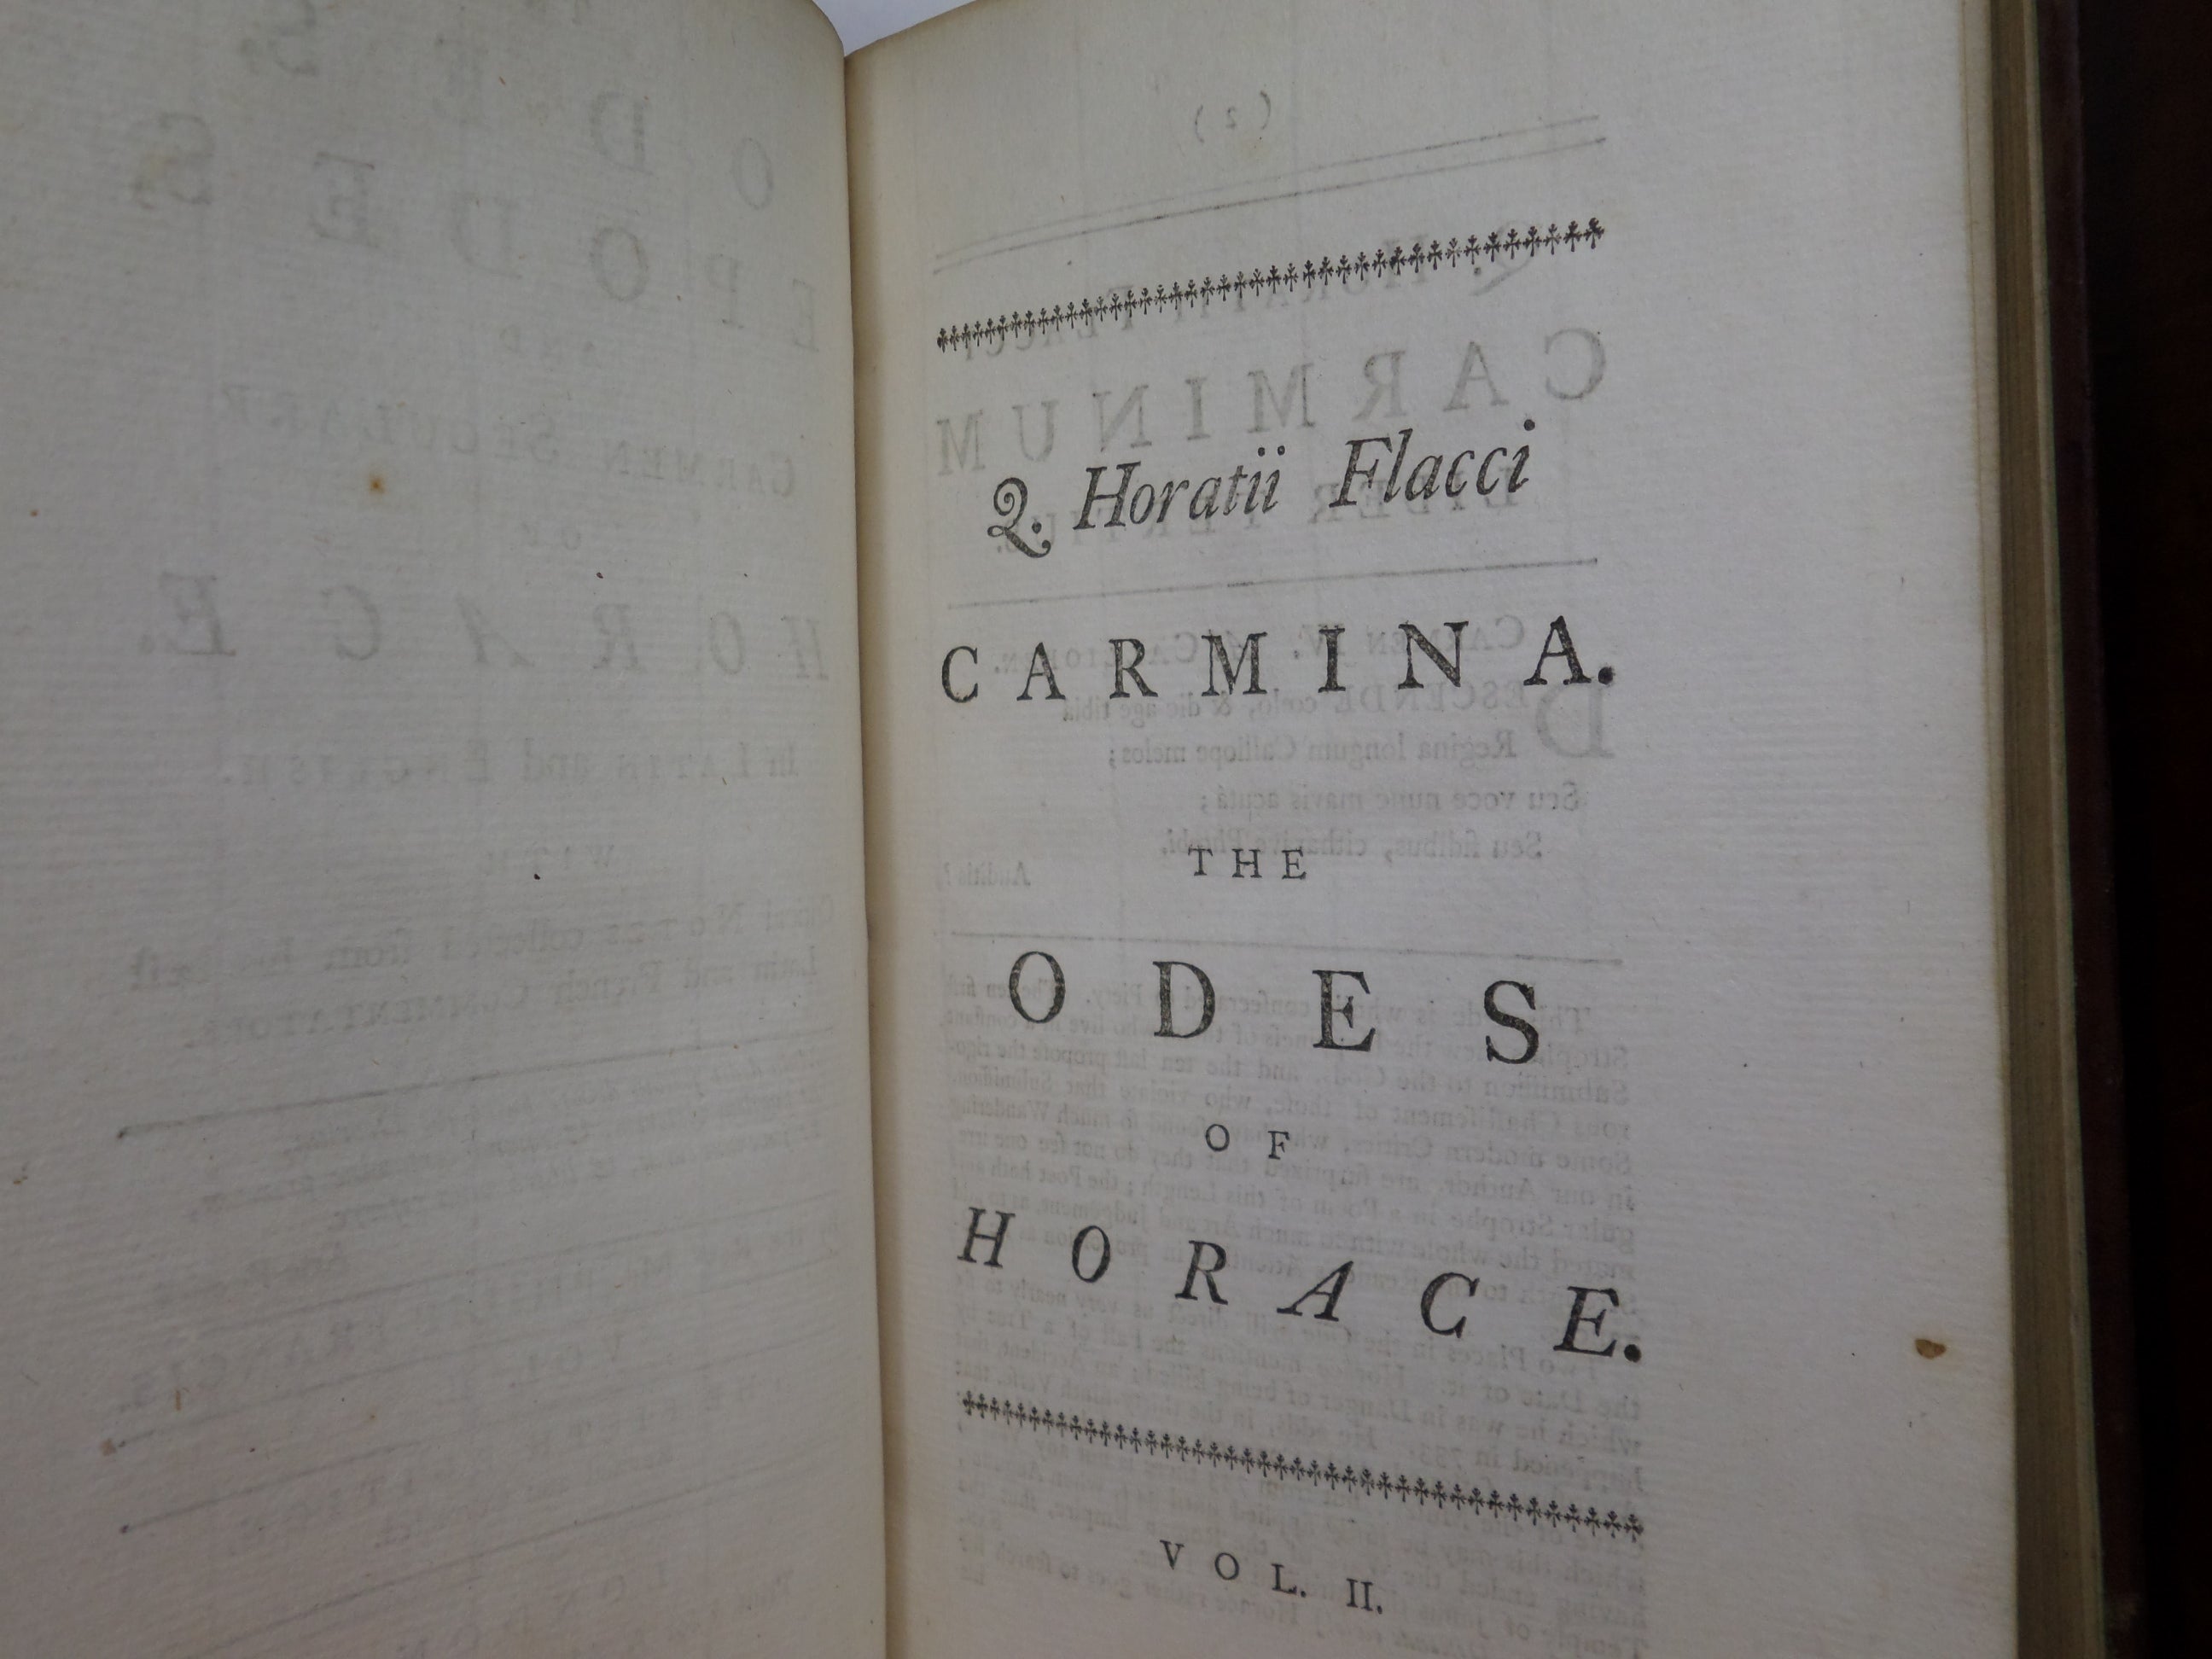 THE WORKS OF HORACE IN LATIN AND ENGLISH BY PHILIP FRANCIS 1753 LEATHER BOUND